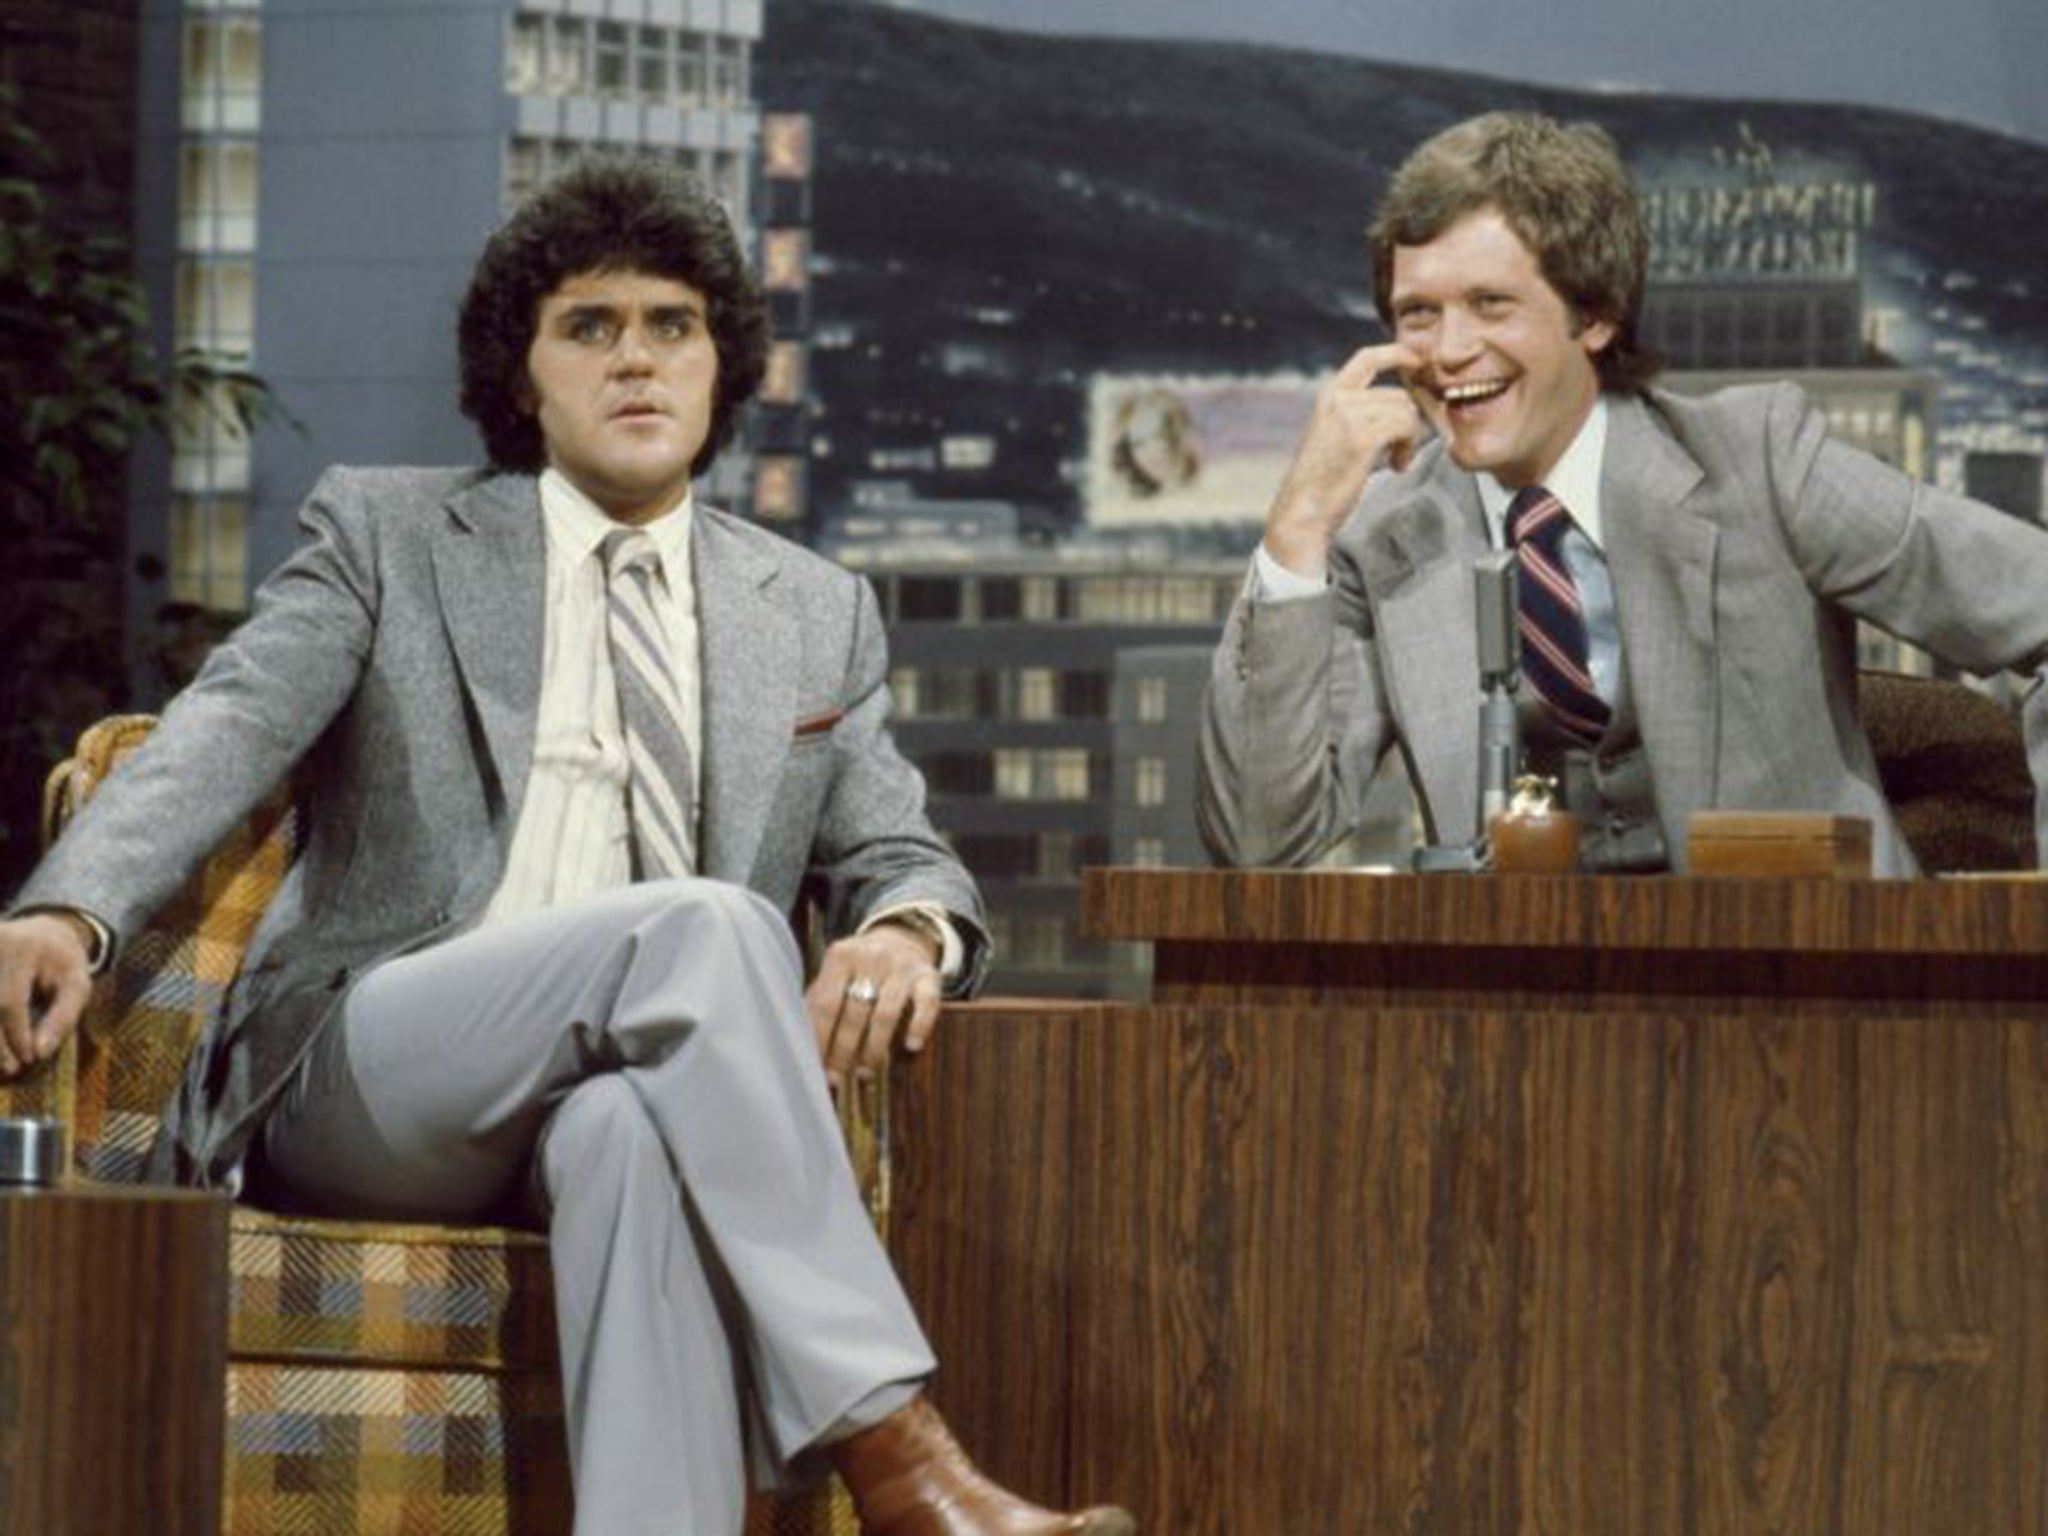 Jay Leno, left, hosted by David Letterman on The Tonight Show in 1979